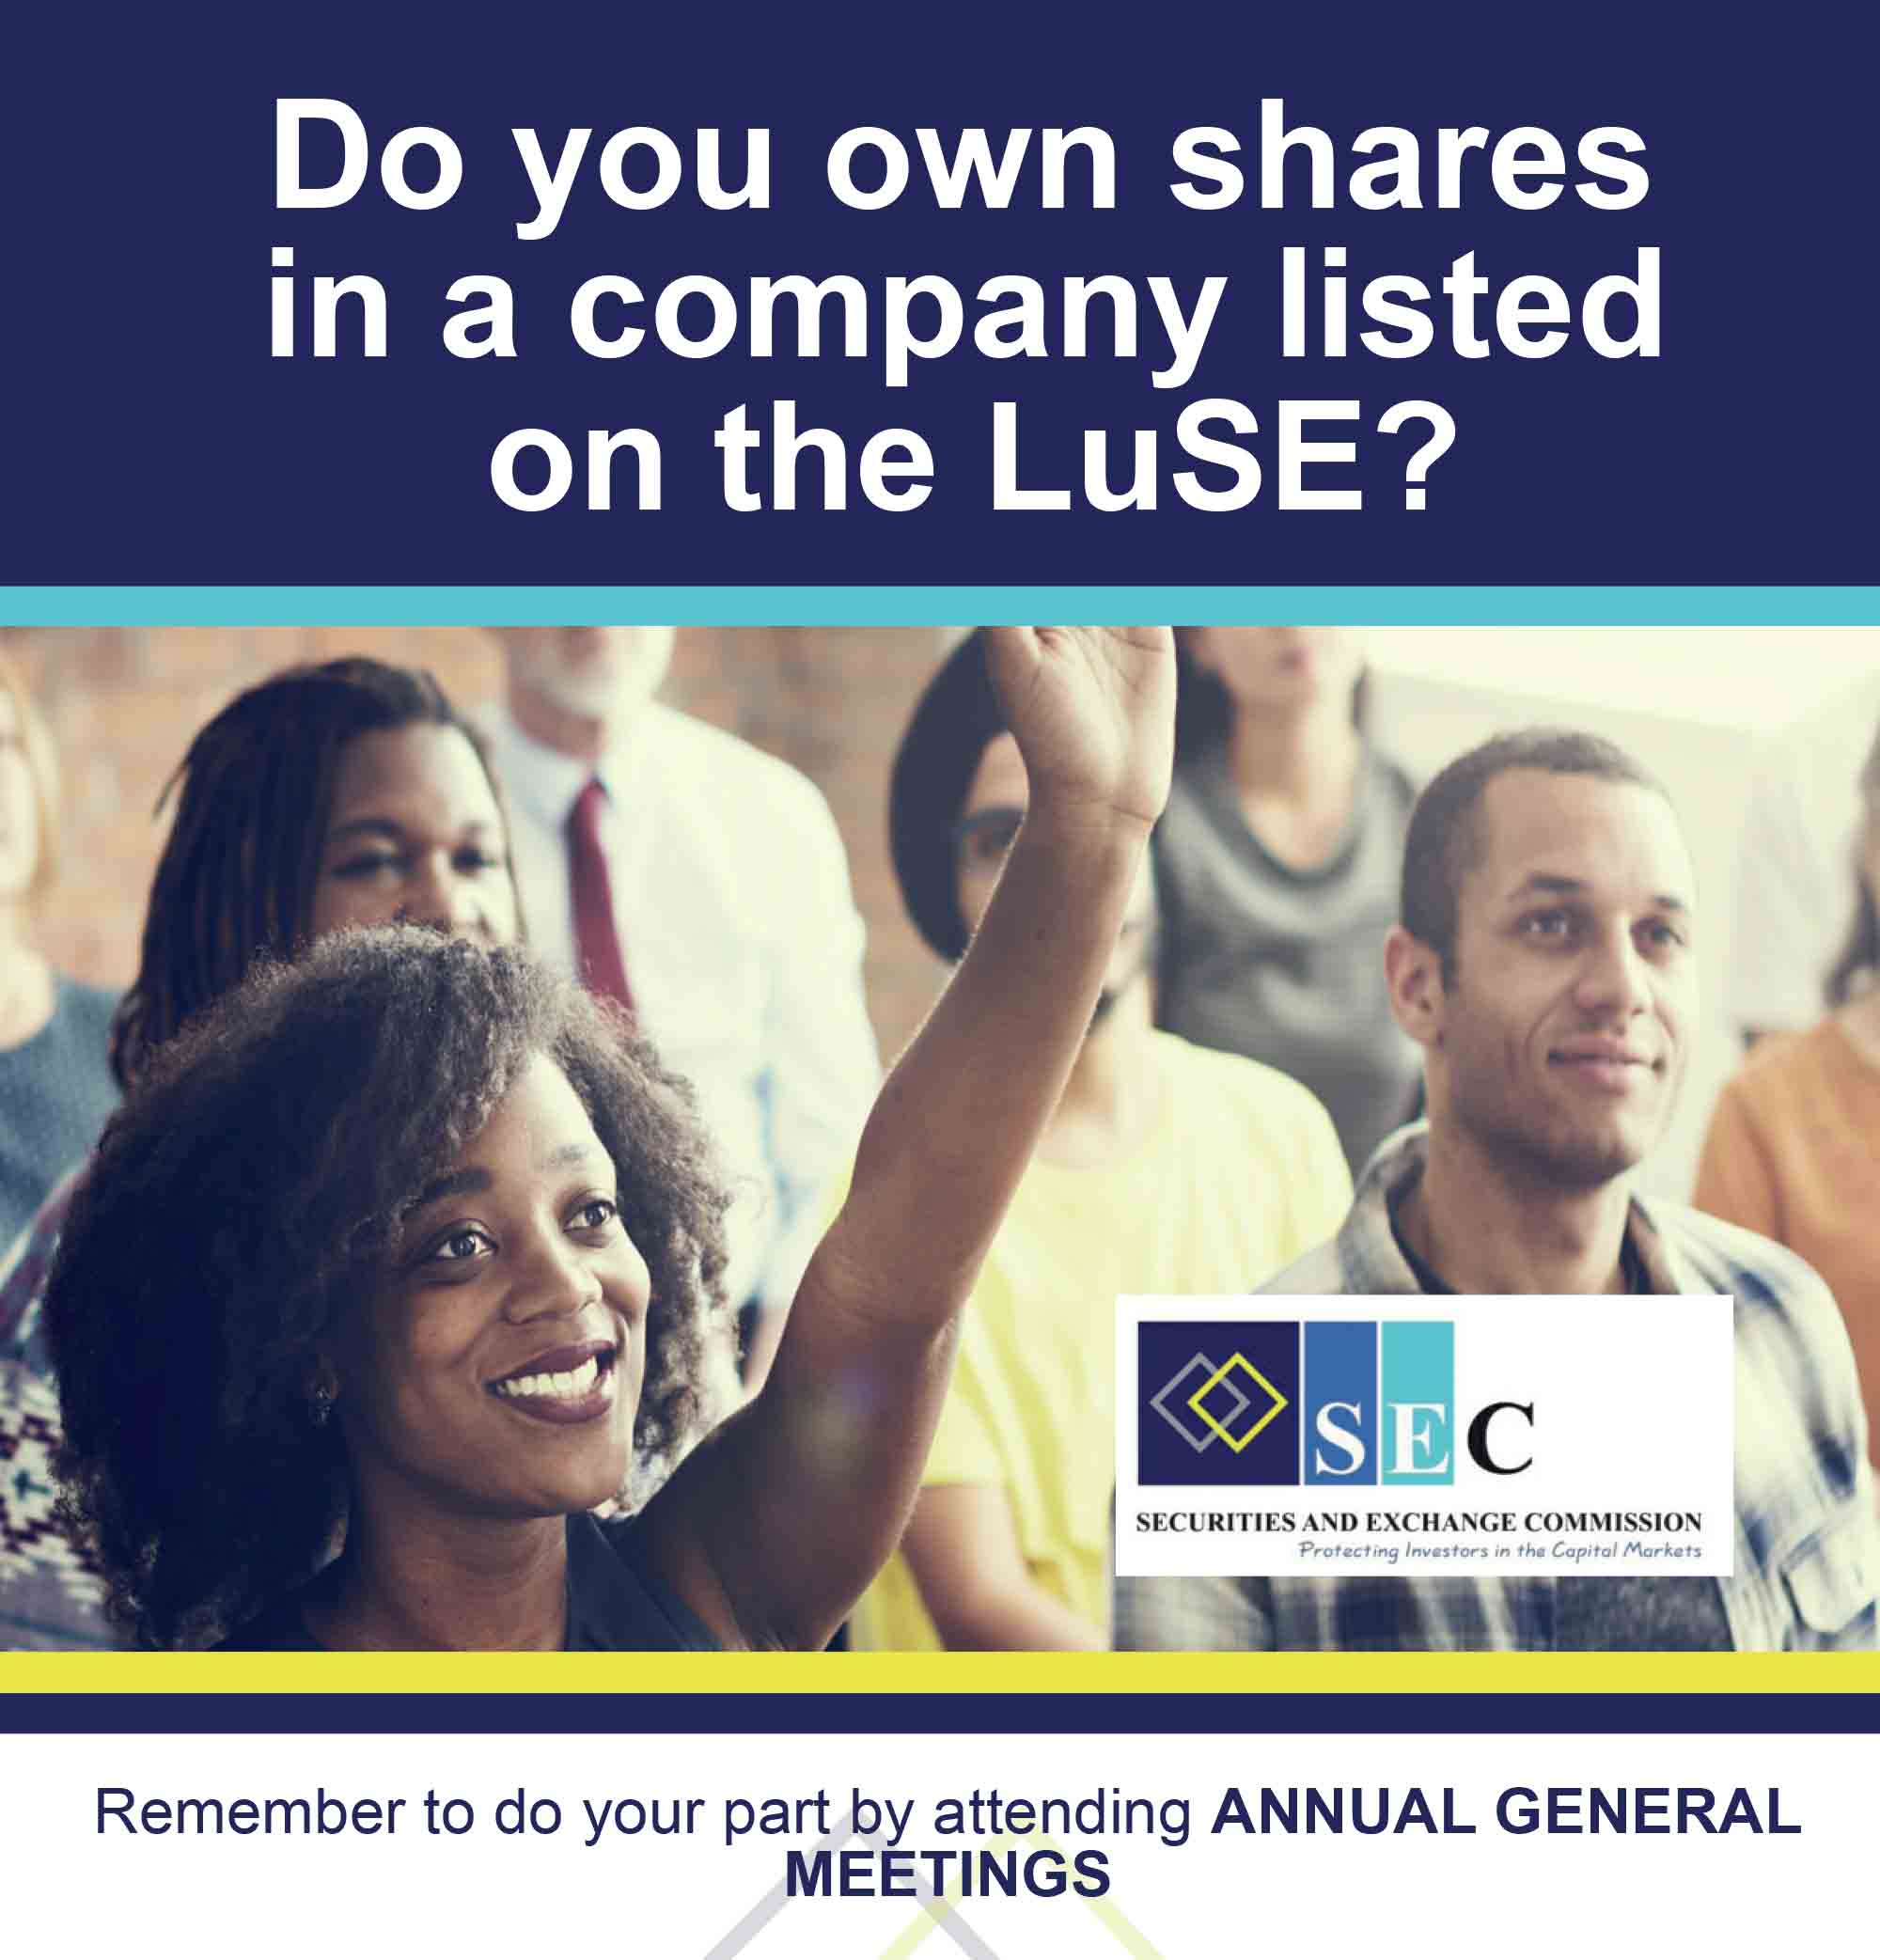 Do you own shares in a company listed on the LuSe